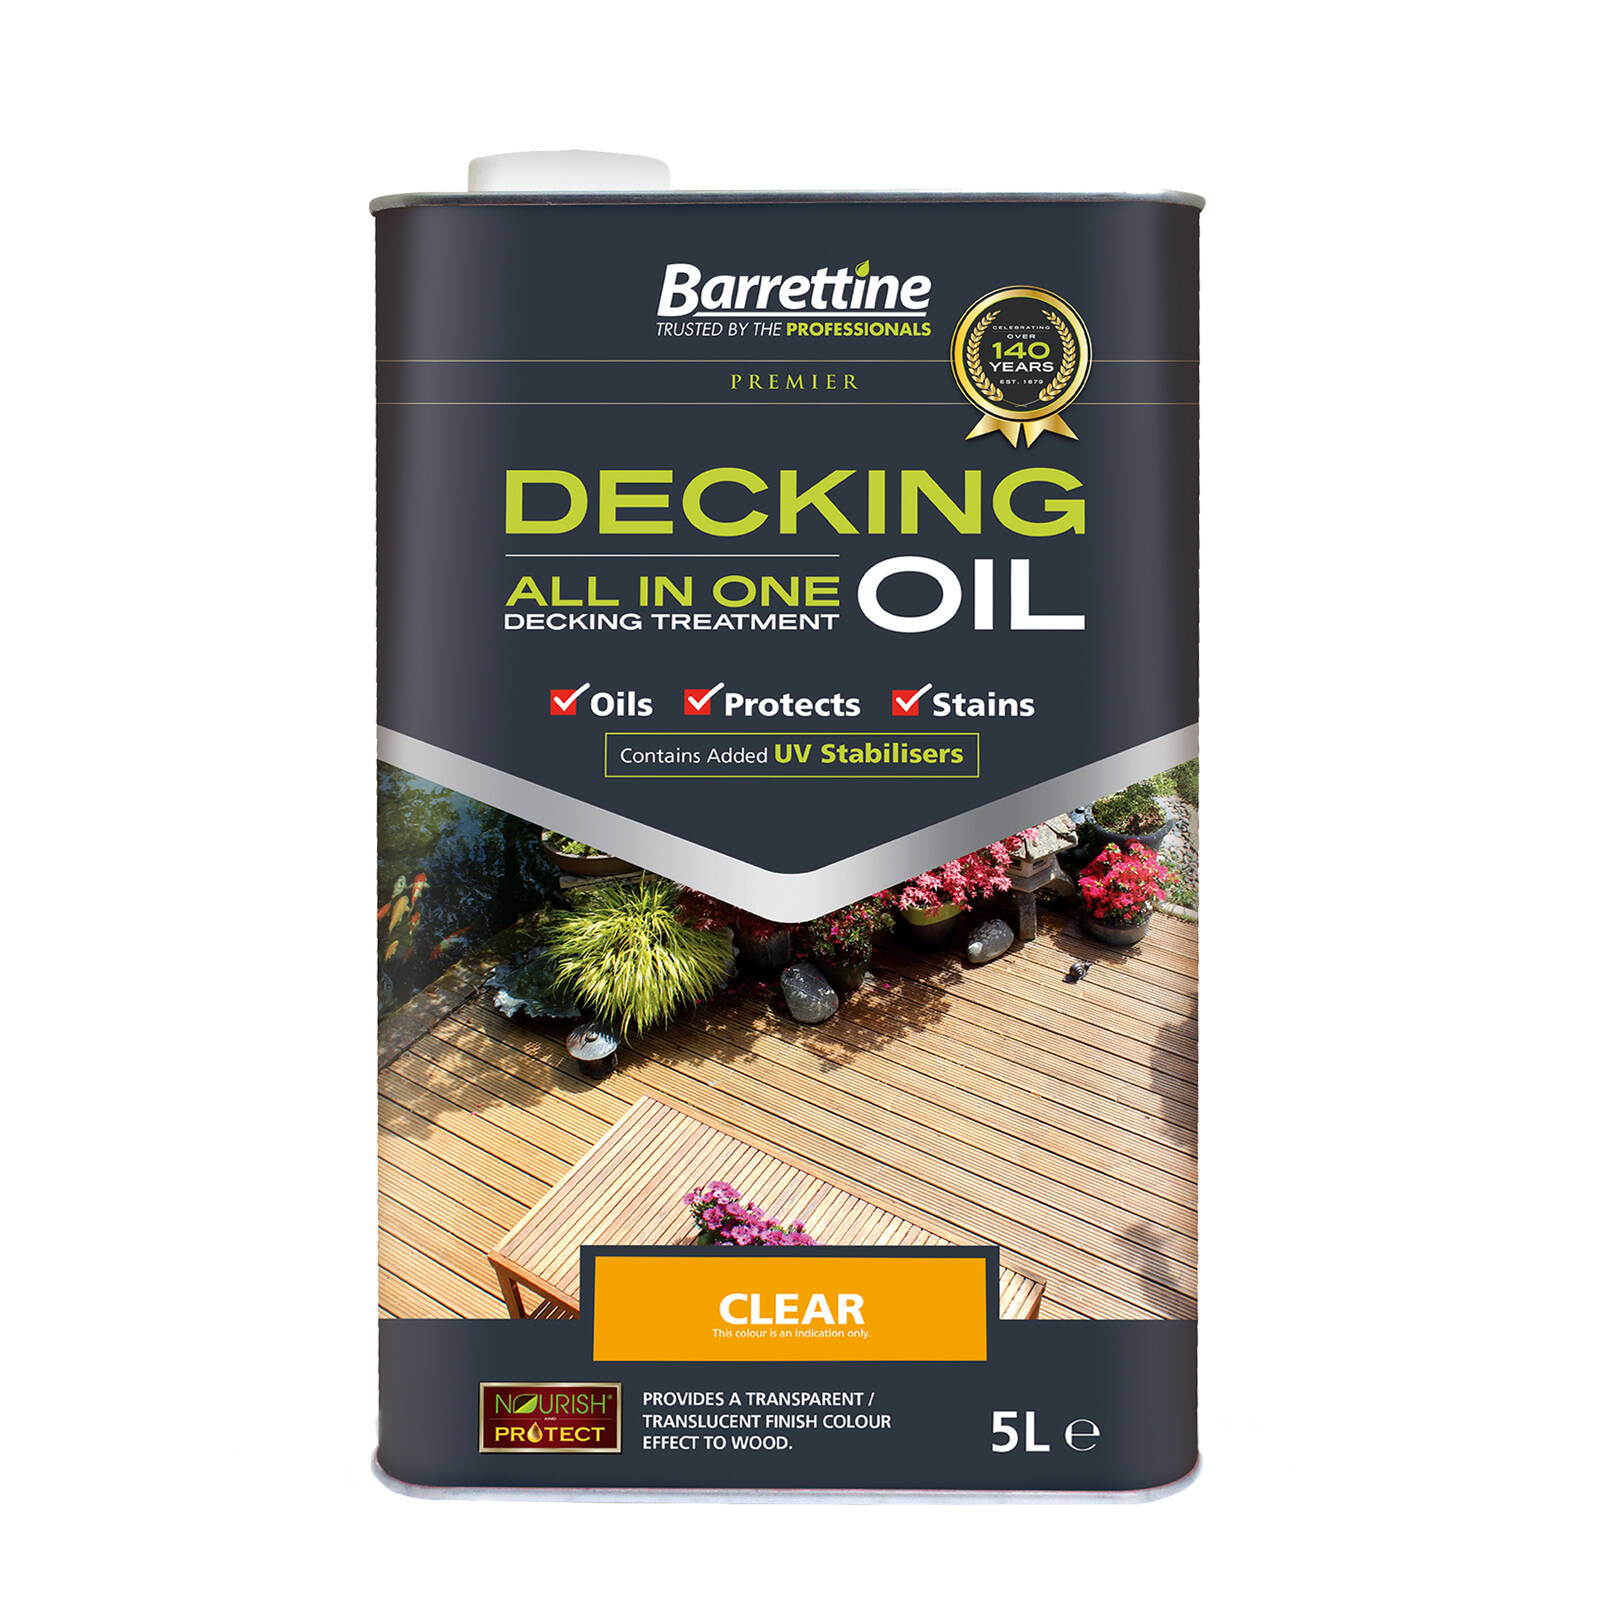 Barrettine Decking Oil - Available in 2.5L & 5L - 5 Shades ...